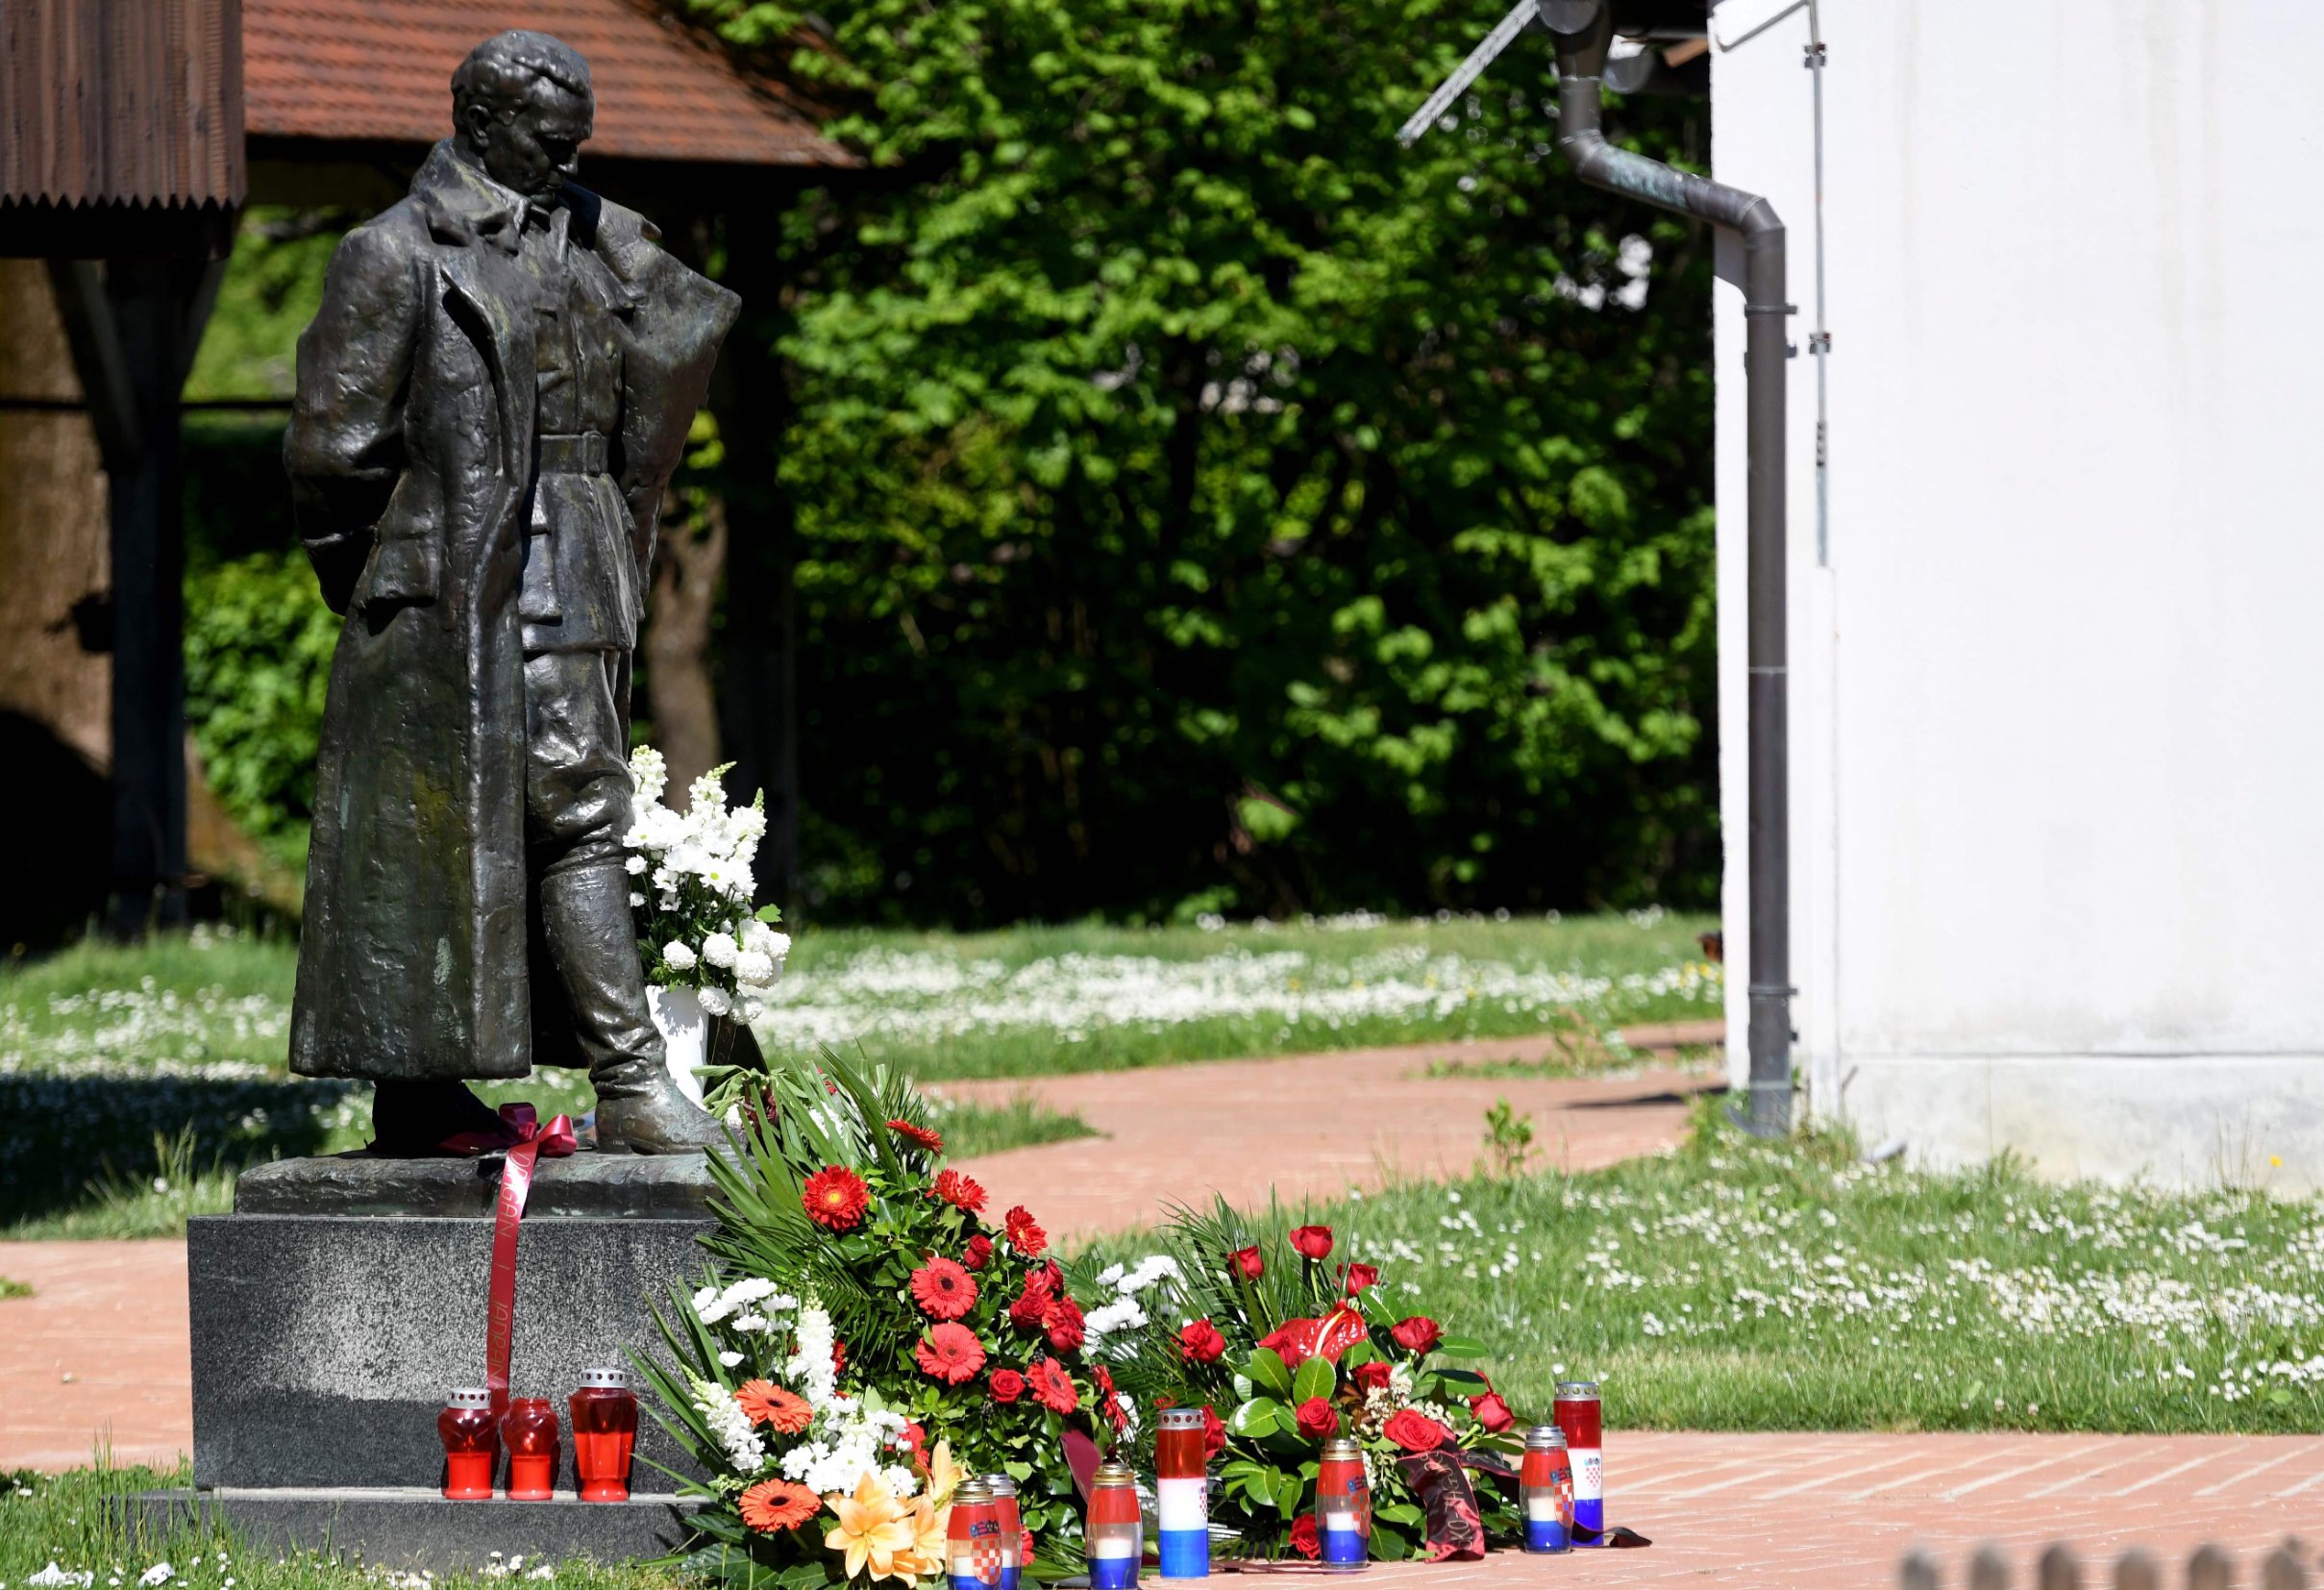 A picture taken on May 4, 2020 shows a monument dedicated to Tito, a statue by Croatian sculptor Antun Augustincic (19001979) of Josip Broz Tito (18921980), former President of communist Yugoslavia, next to the museum in Josip Broz Tito's birth house, in the village of Kumrovec, some 50 km from Zagreb. - Tito ruled the former Yugoslavia since World War II to his death at age 87 on May 4, 1980. A benevolent unifier or a power-hungry dictator? On the 40th anniversary of his death, the late Yugoslav leader Josip Broz Tito's legacy is still a topic of debate. (Photo by Denis LOVROVIC / AFP)